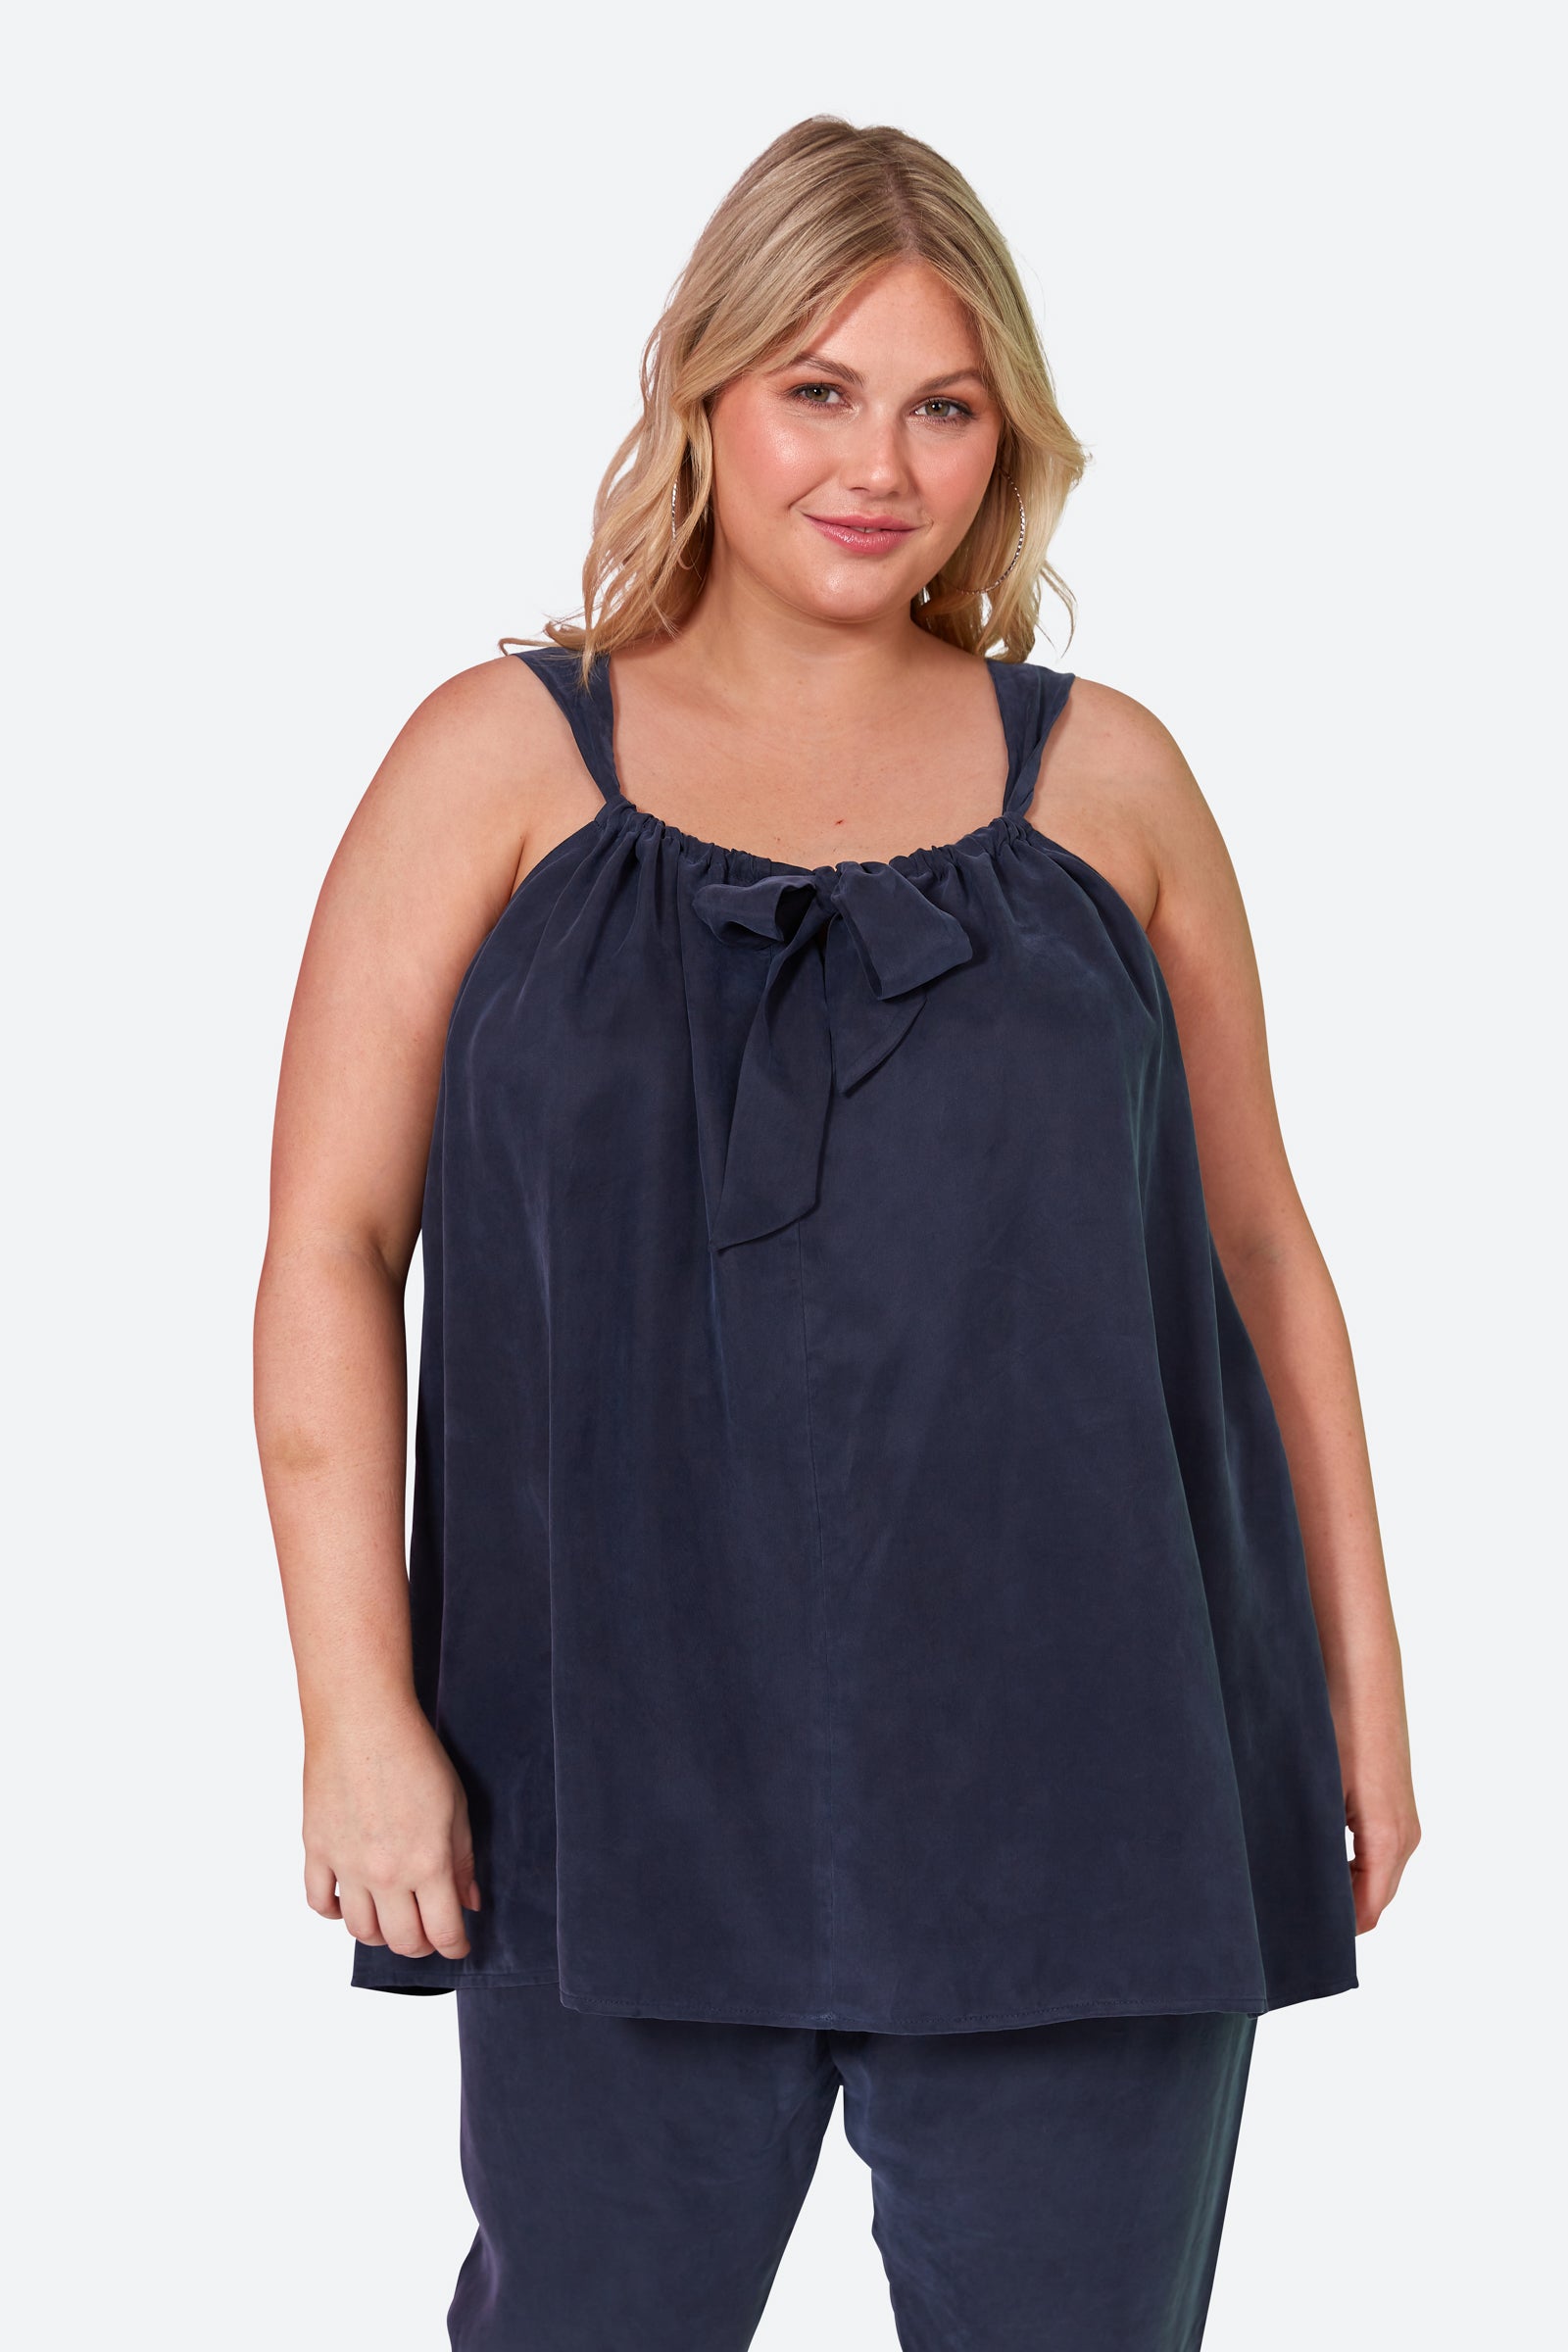 Elixir Tank - Sapphire - eb&ive Clothing - Top Strappy Cupro